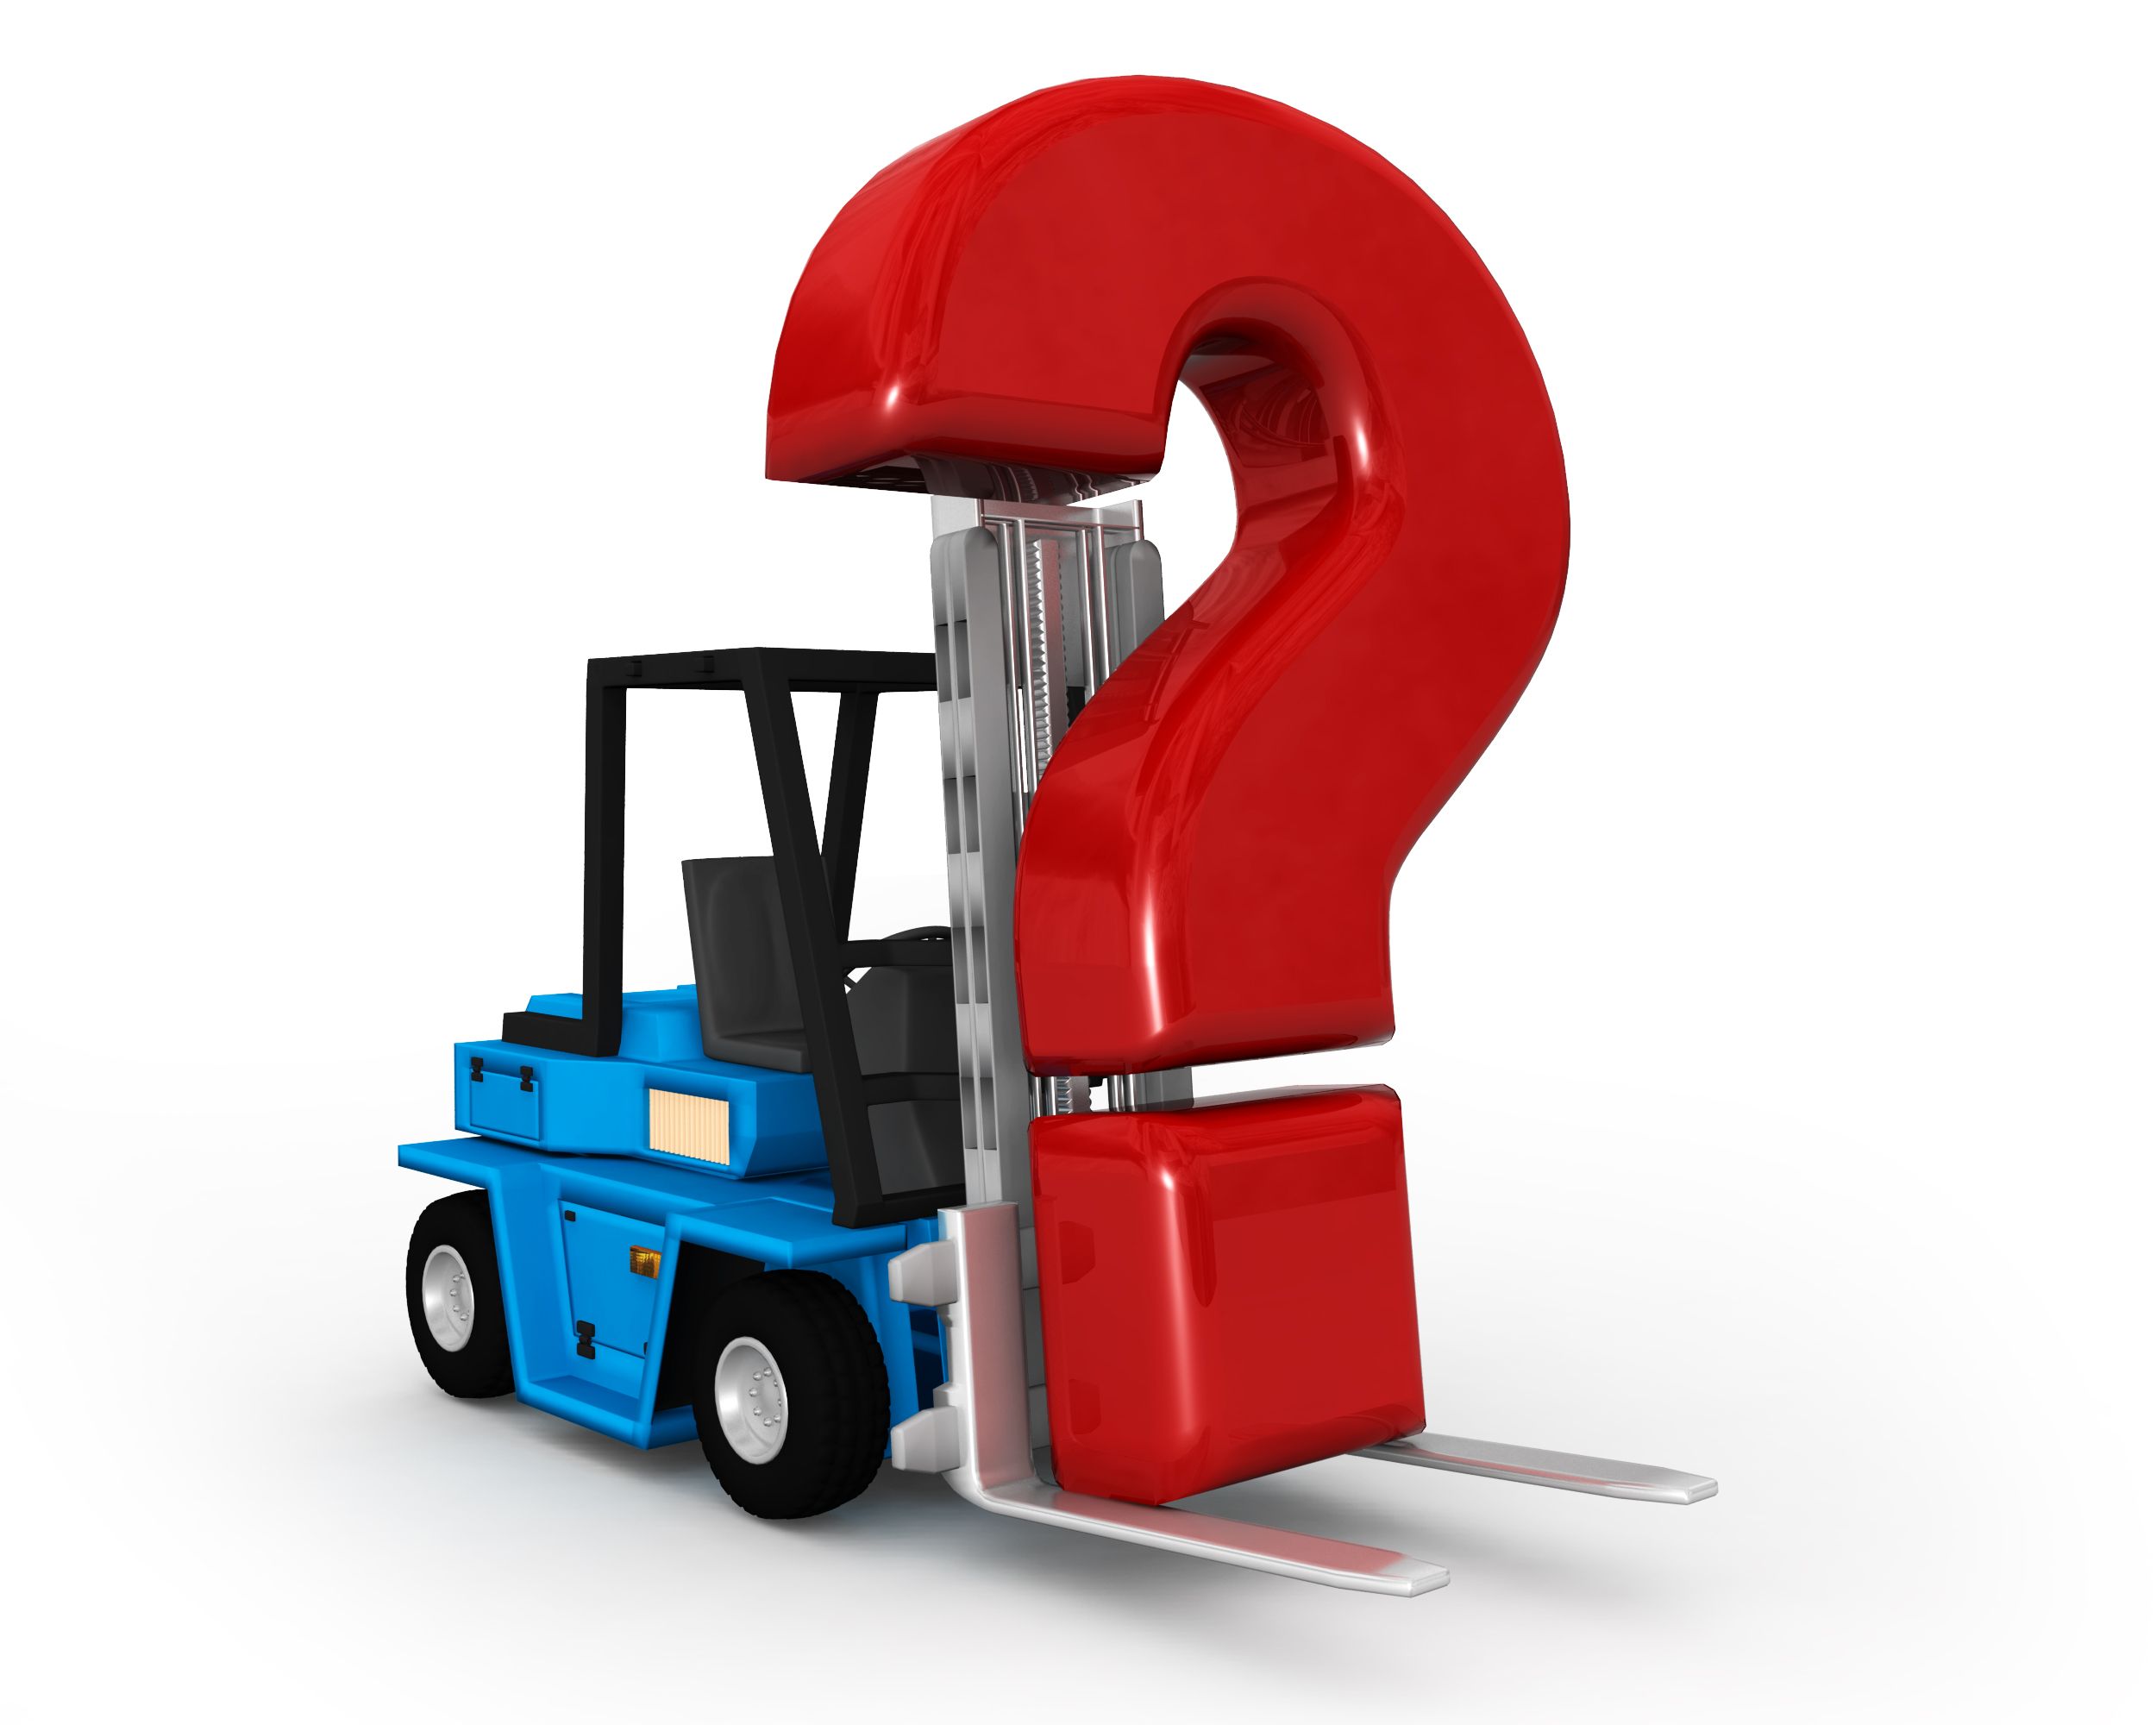 0115 Forklift Truck And Red Question Mark Stock Photo Graphics Presentation Background For Powerpoint Ppt Designs Slide Designs